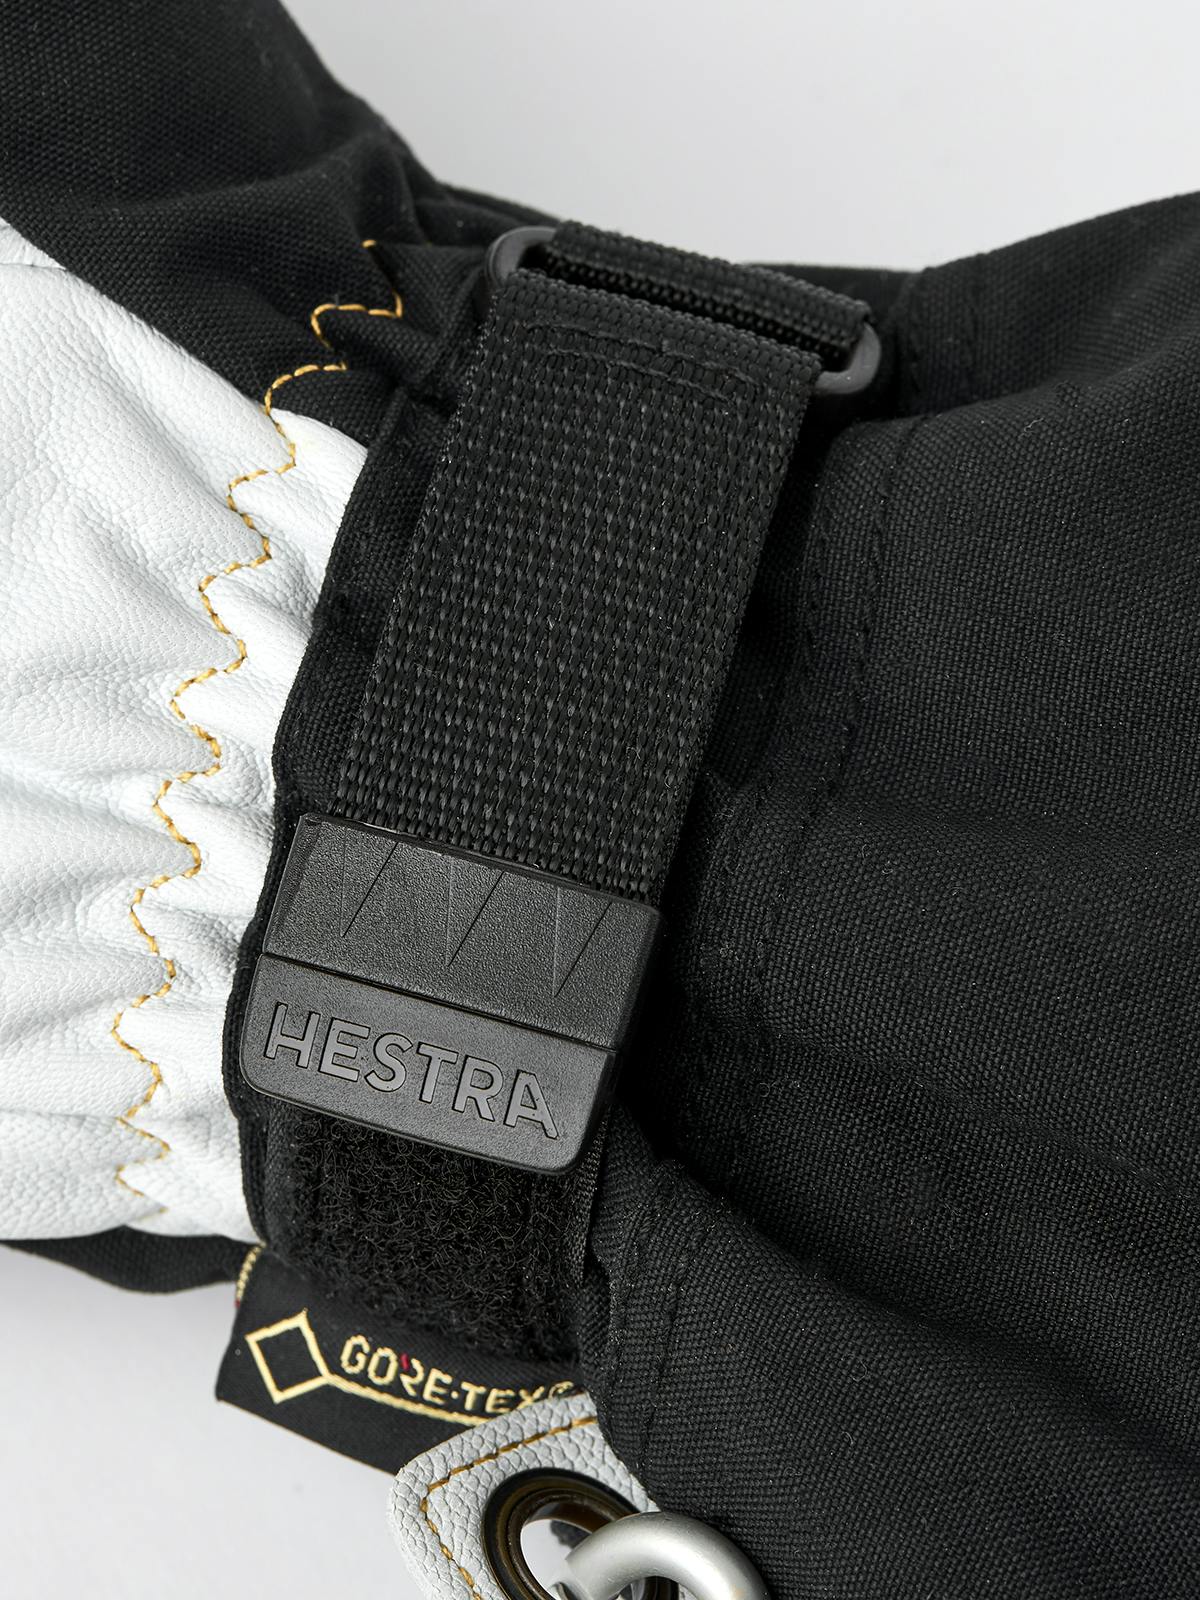 Hestra Army Leather GORE-TEX Gloves